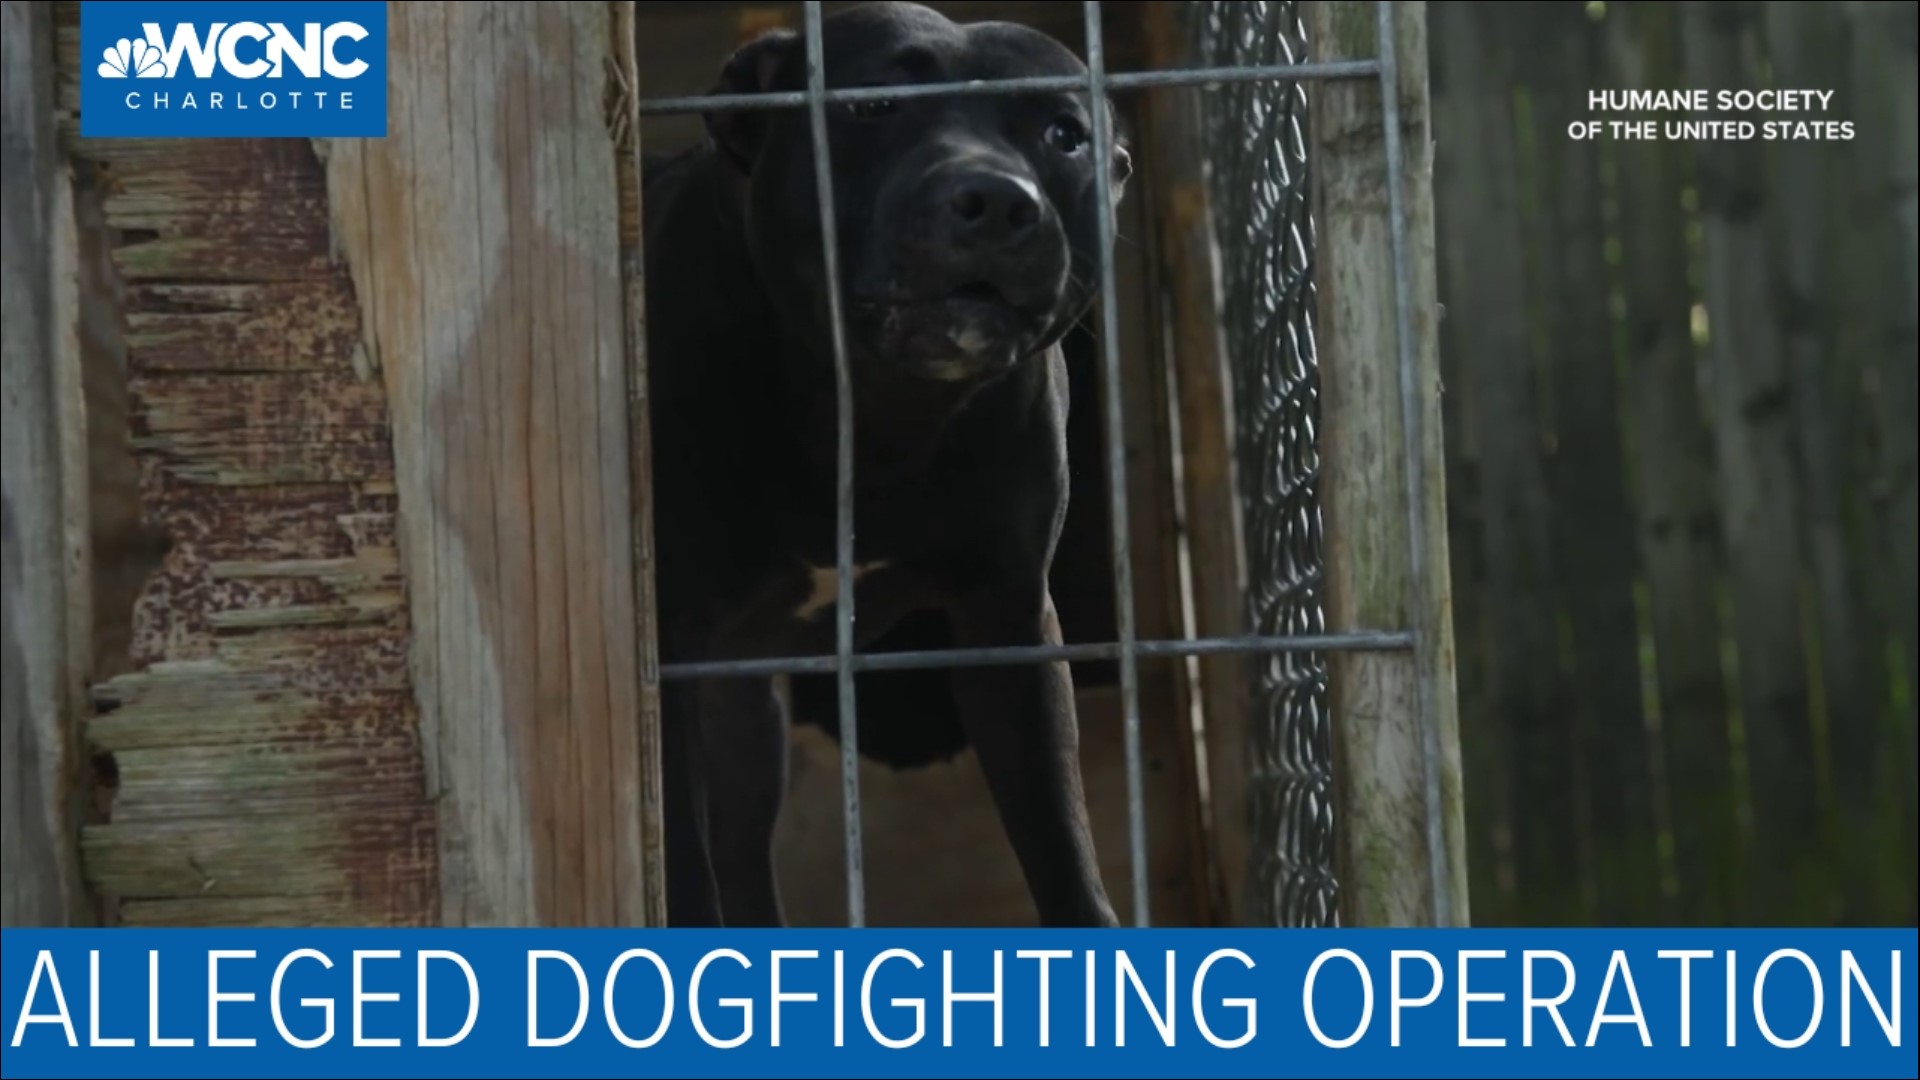 More than a dozen dogs were removed from a Gastonia home that also allegedly housed a dogfighting operation, according to animal advocates.